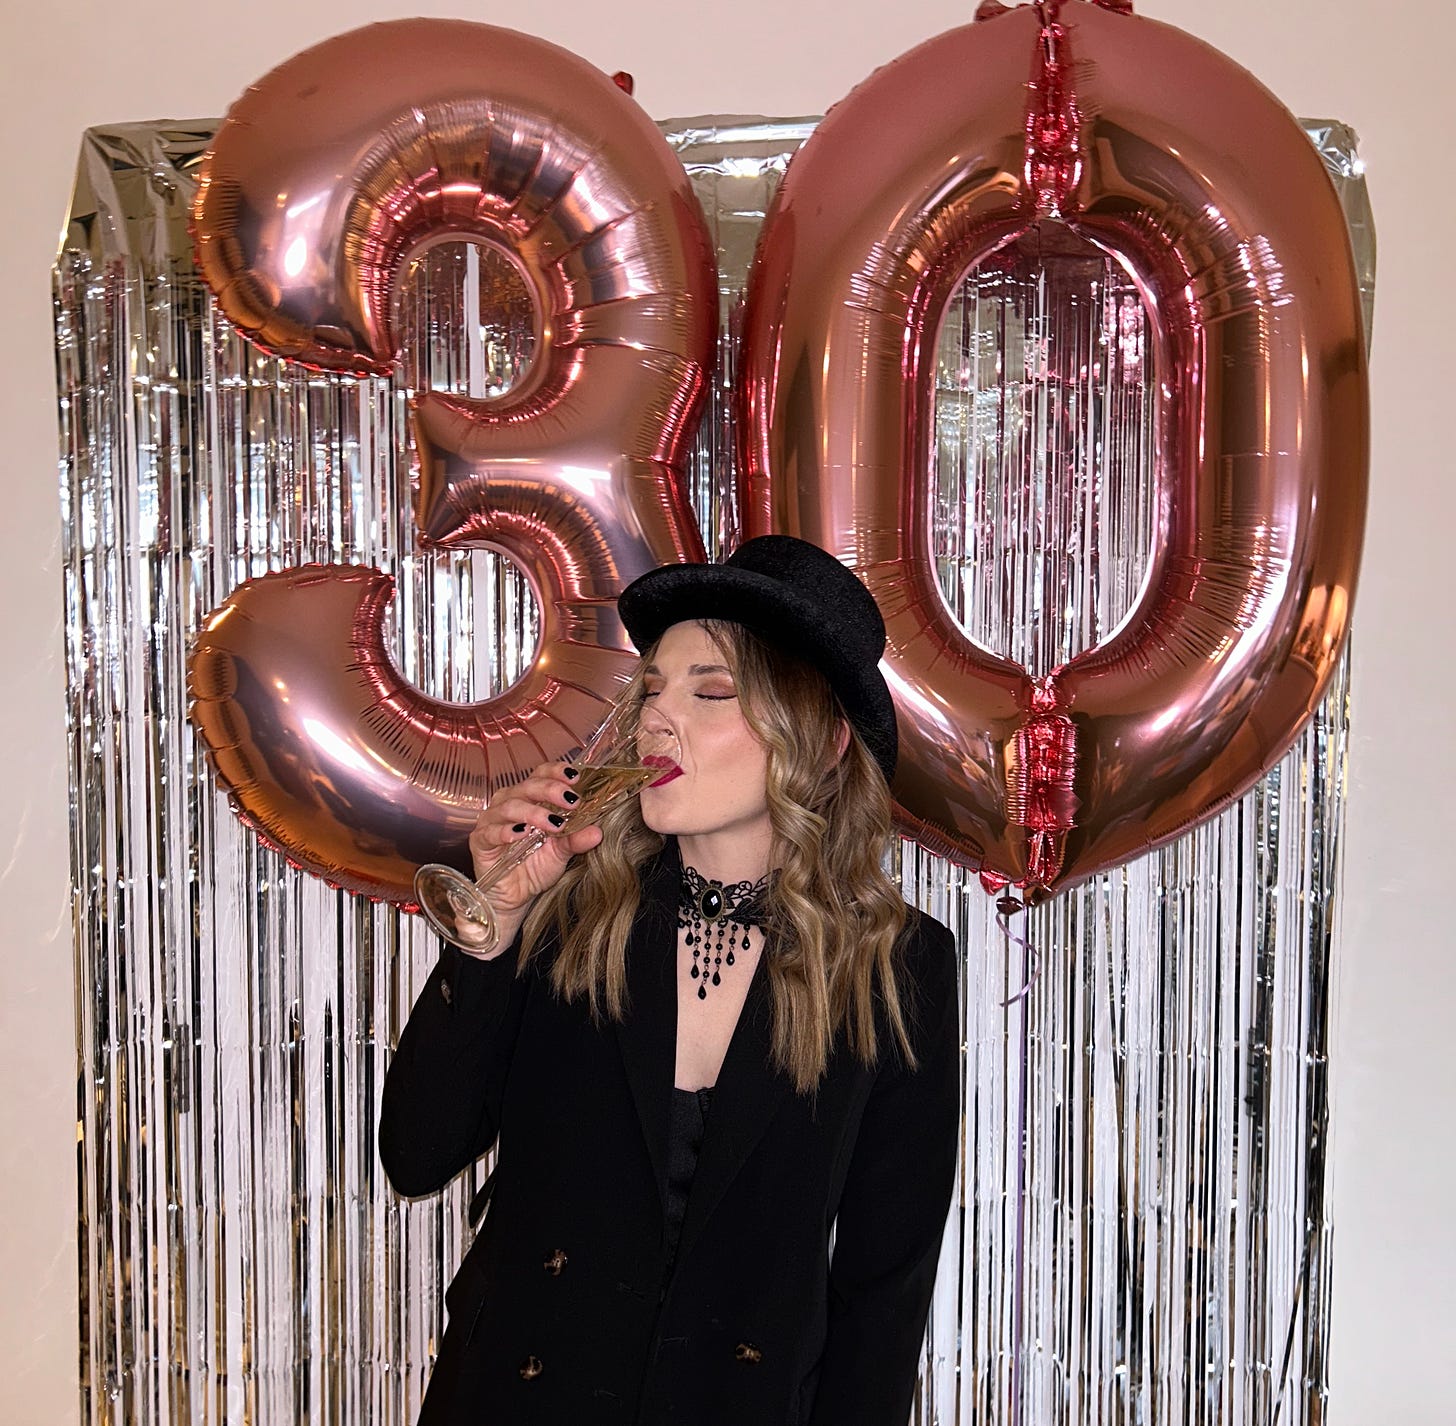 Image of Jess drinking sparking wine with giant 3 0 balloons behind her.